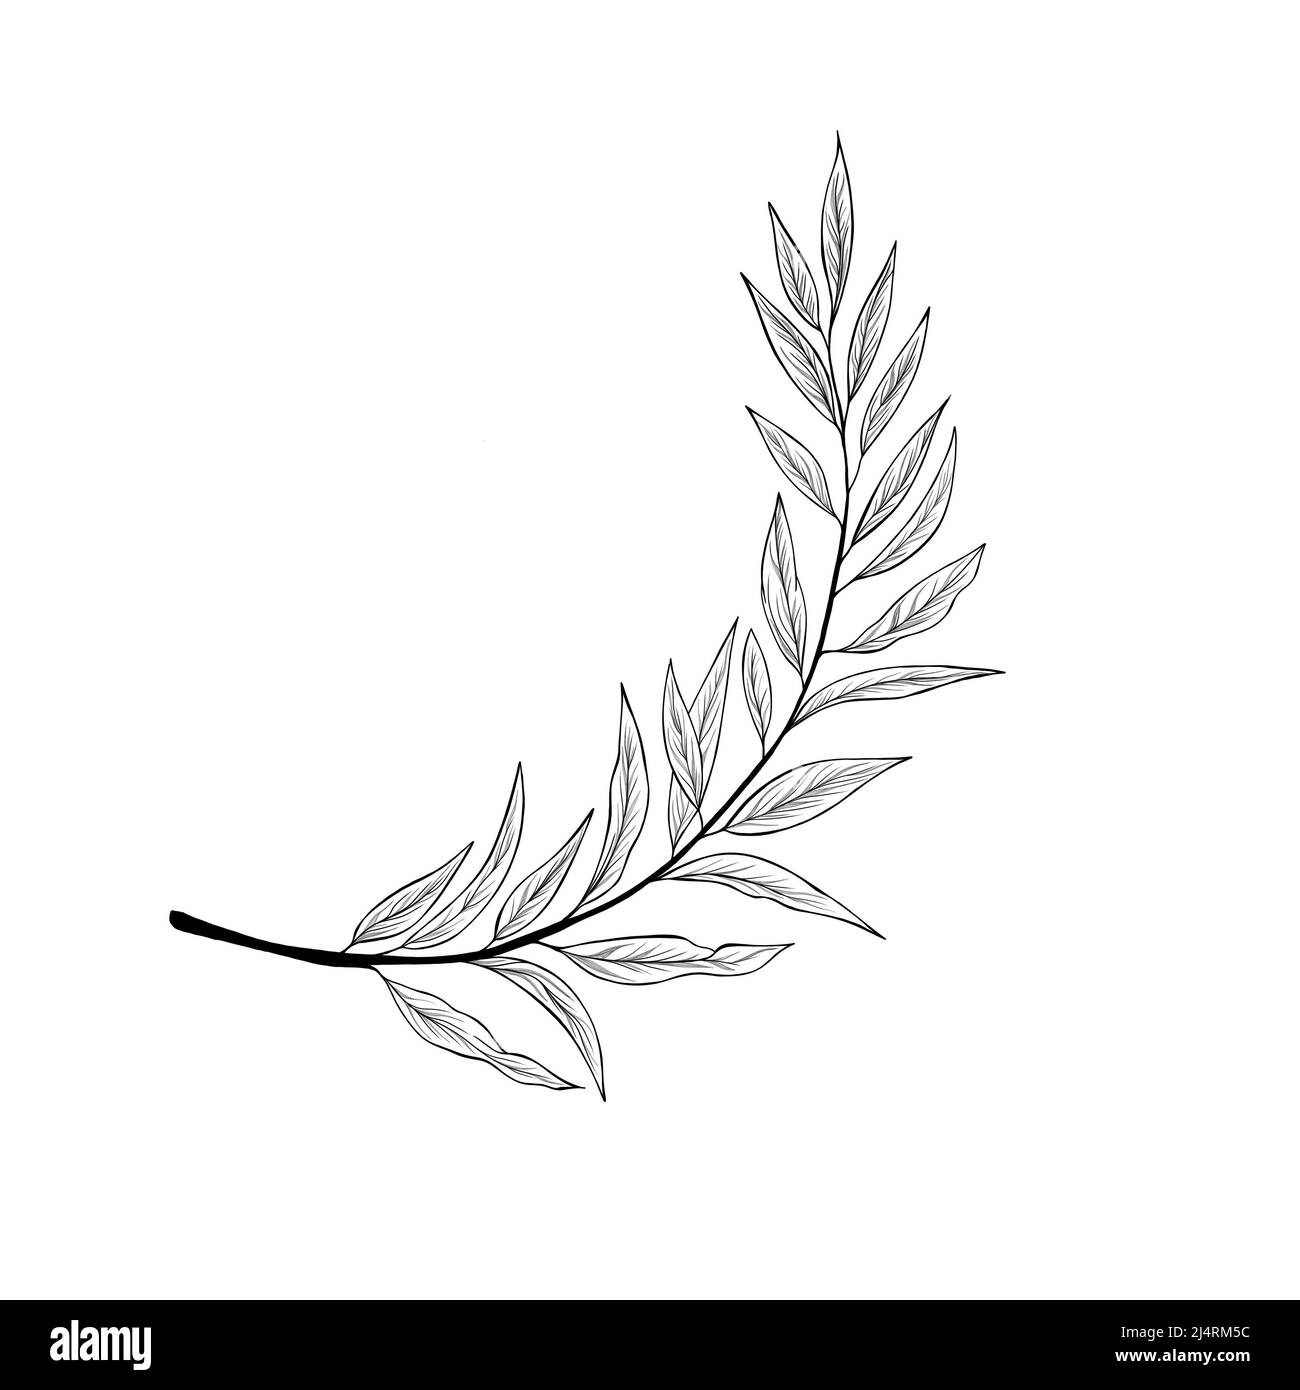 botany tattoo sketch - beautiful twig plant. Botanical element template for graphic design, wedding decor, textiles, souvenir gift, stationery print Stock Photo